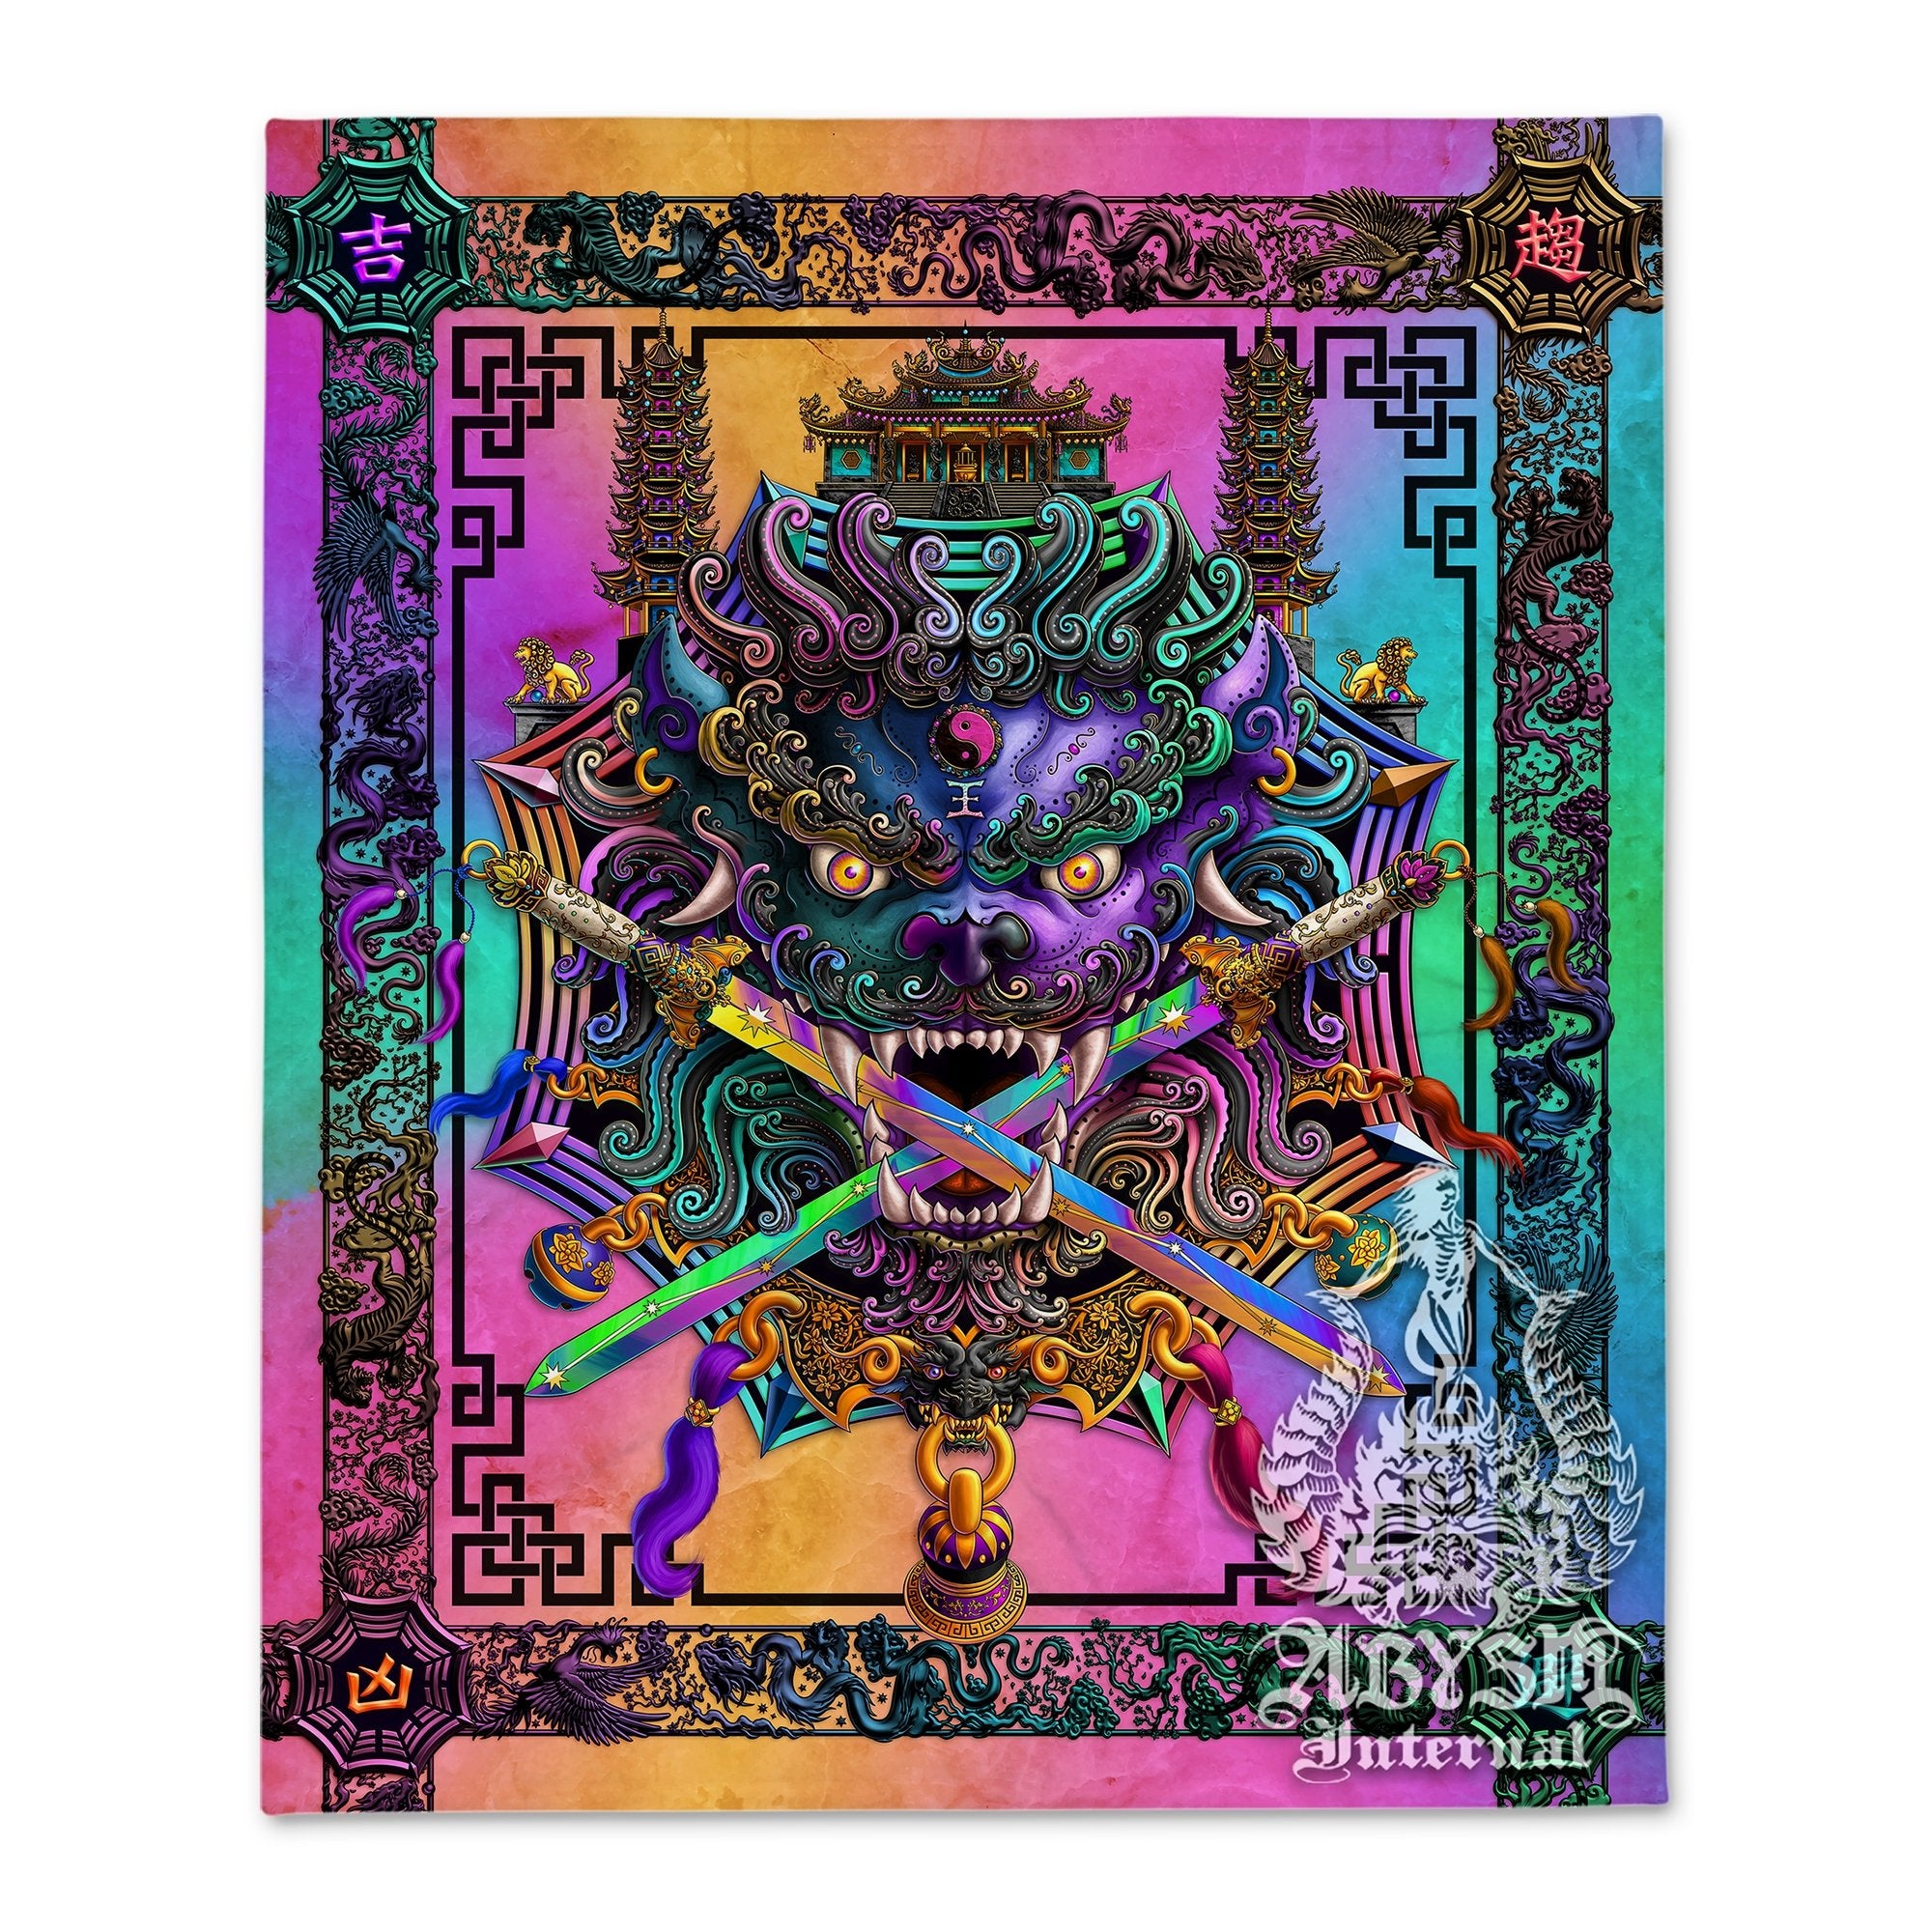 Lion Tapestry, Taiwan Sword Lion, Chinese Wall Hanging, Gamer Home Decor, Asian Mythology, Eclectic and Funky - Pastel Punk Black - Abysm Internal